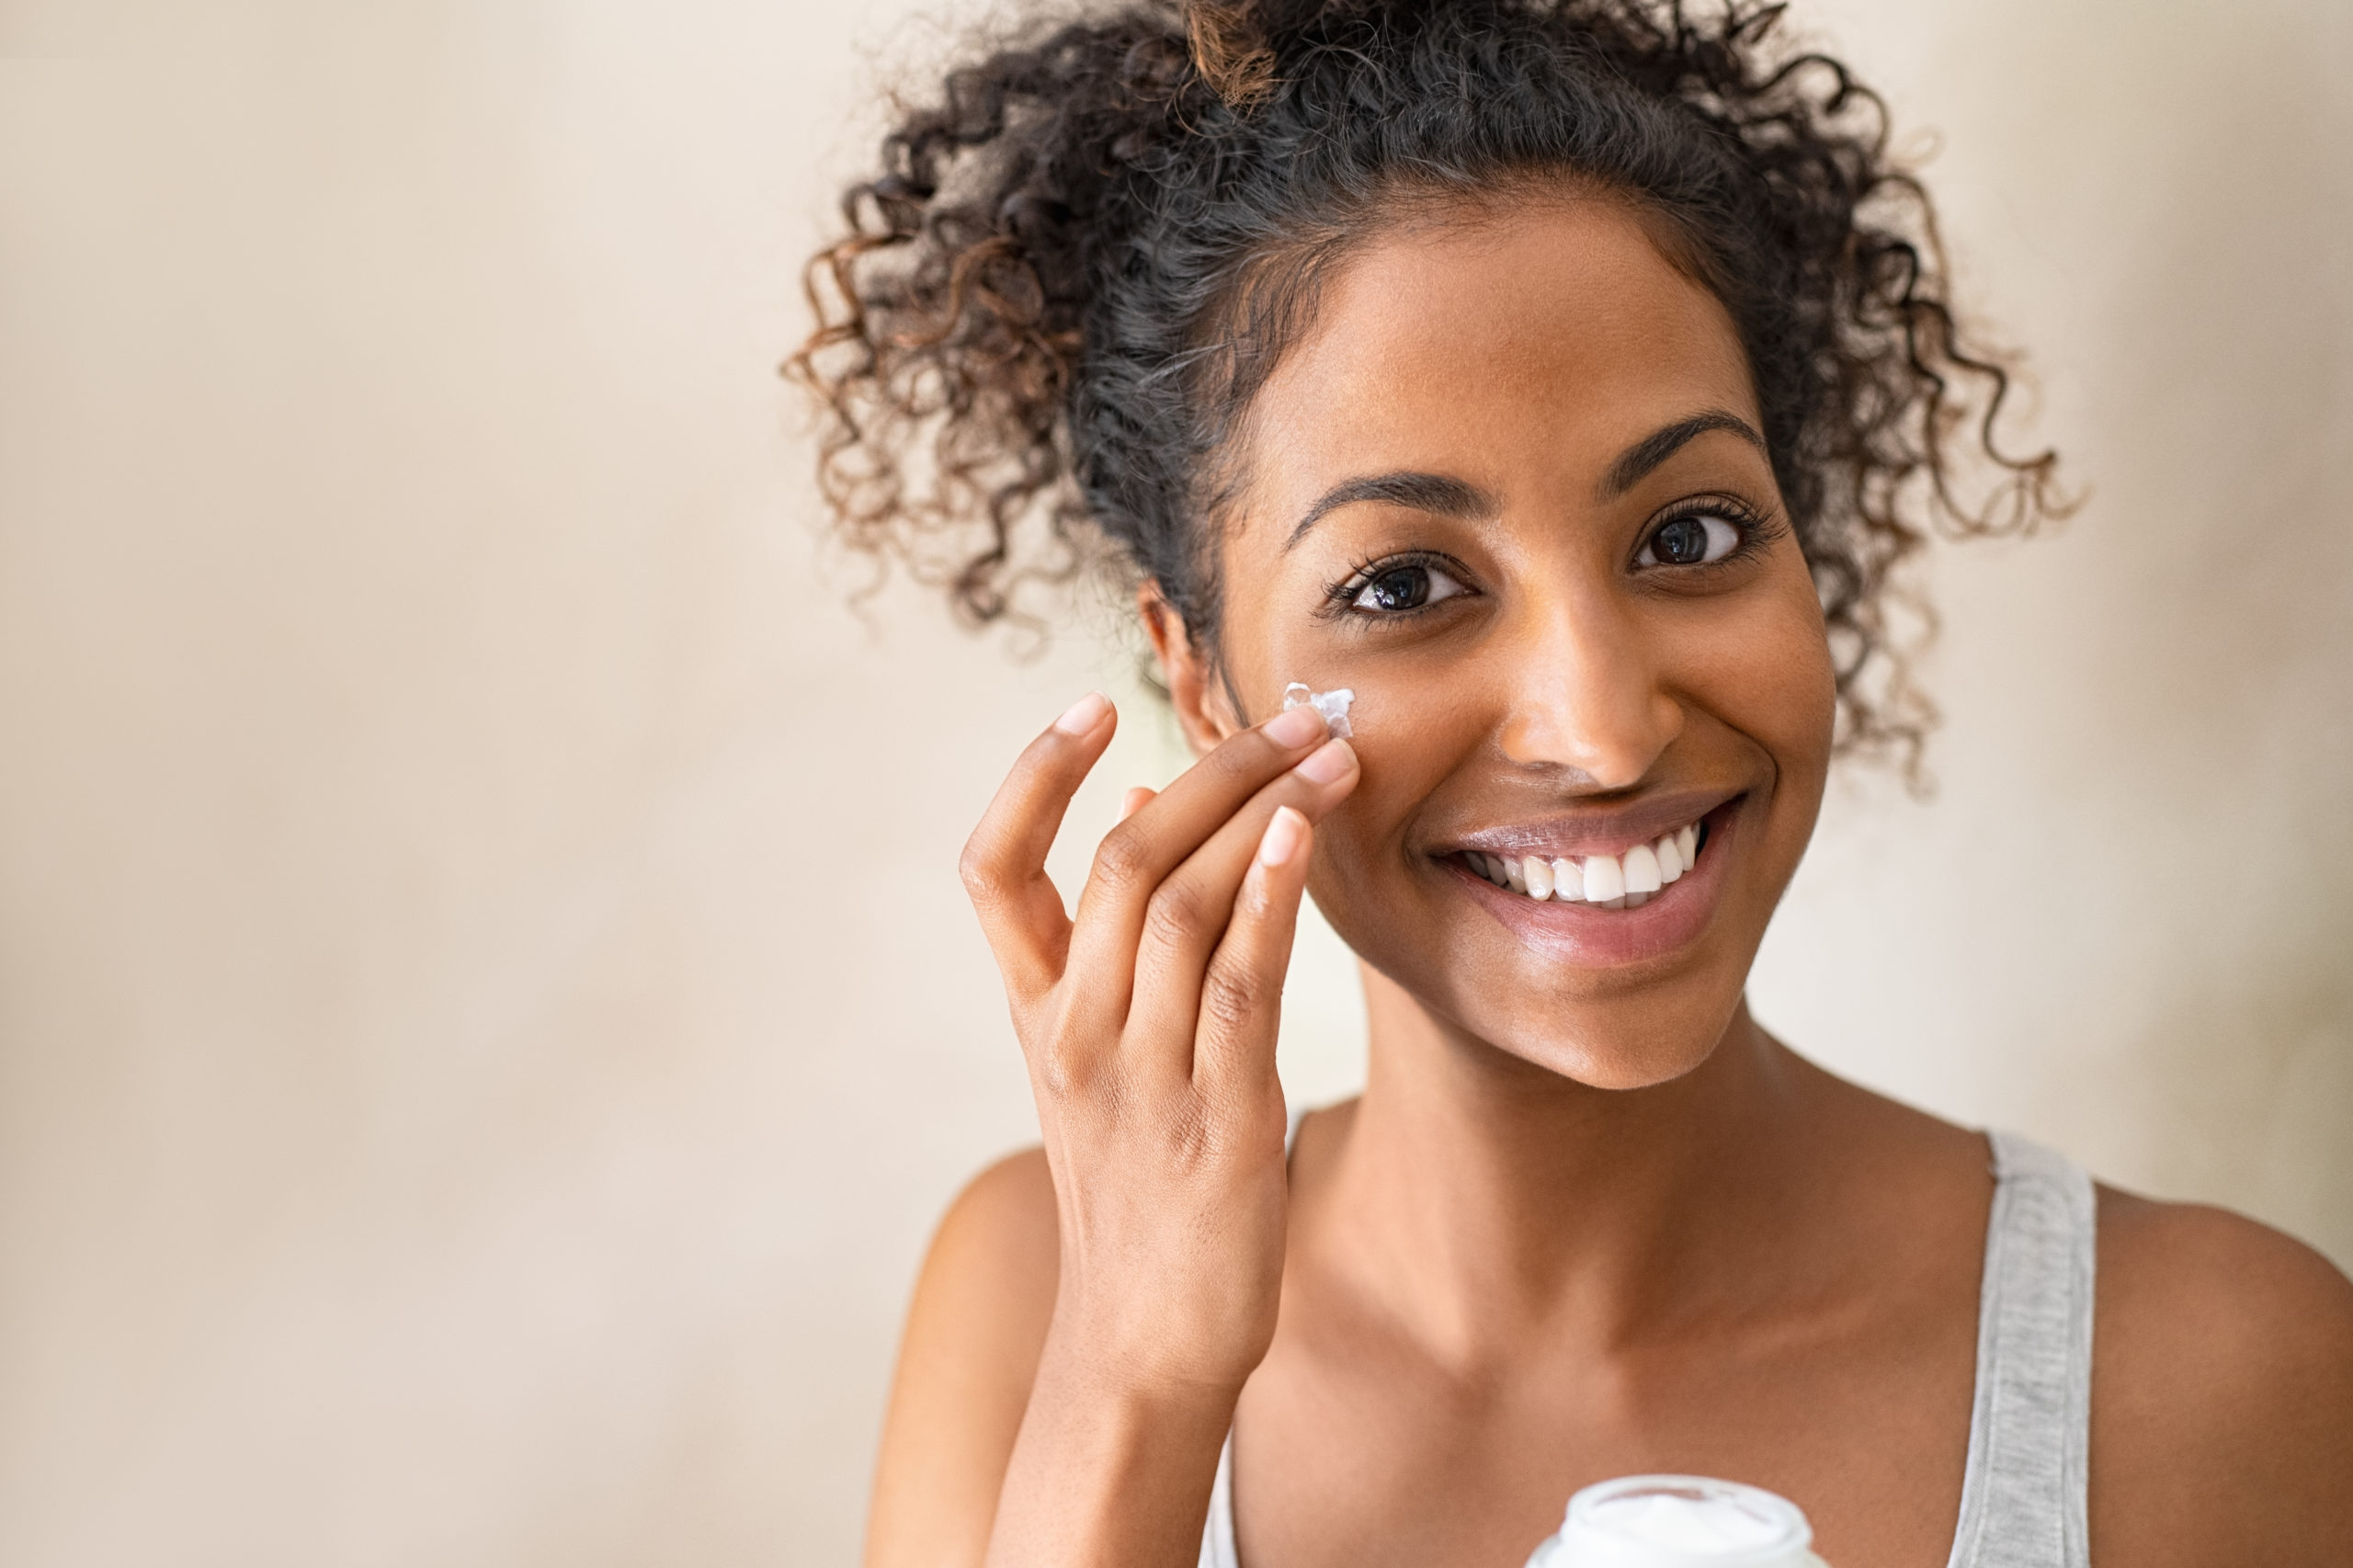 Smiling woman putting on face cream